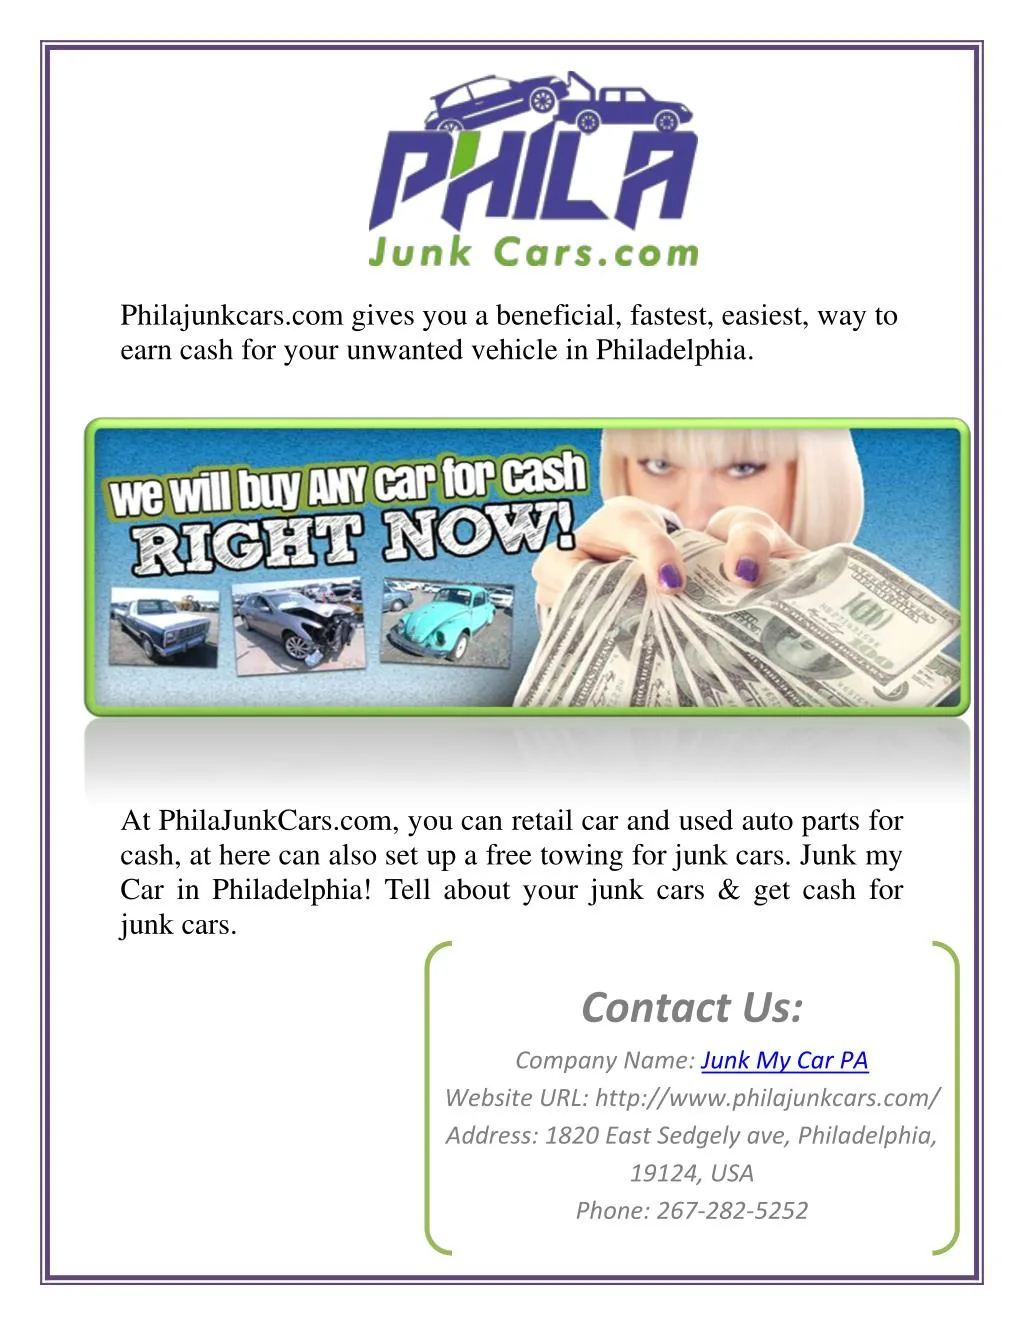 philajunkcars com gives you a beneficial fastest